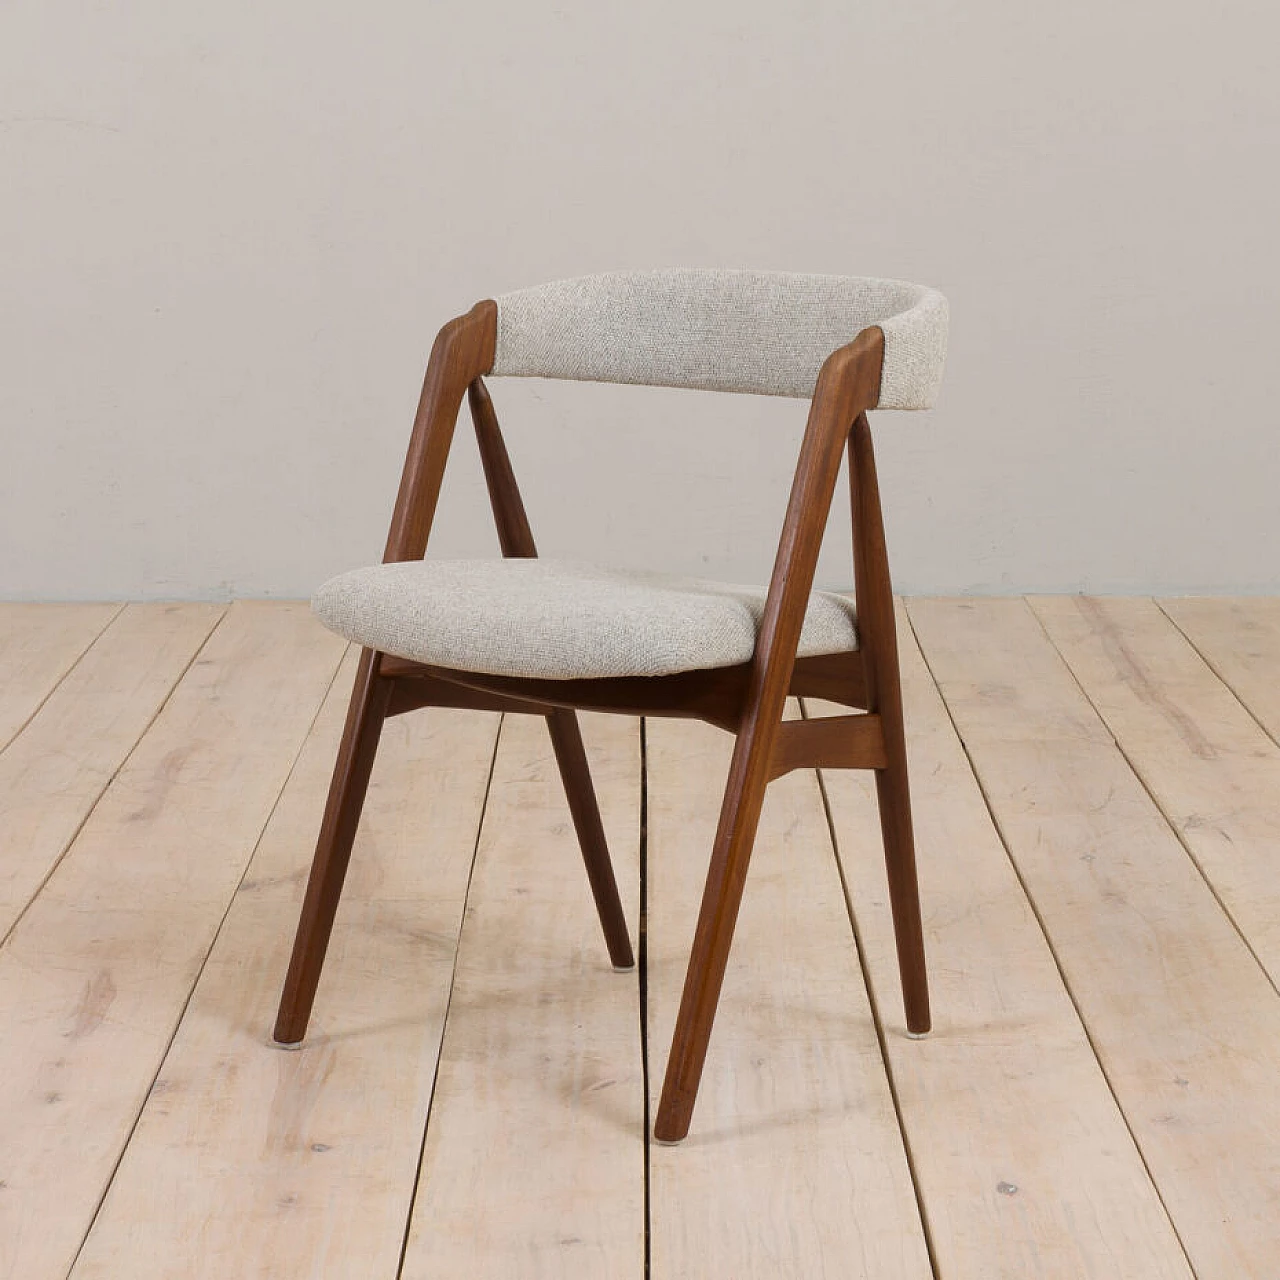 4 Teak and beige wool chairs by Thomas Harlev for Farstrup Møbler, 1950s 6